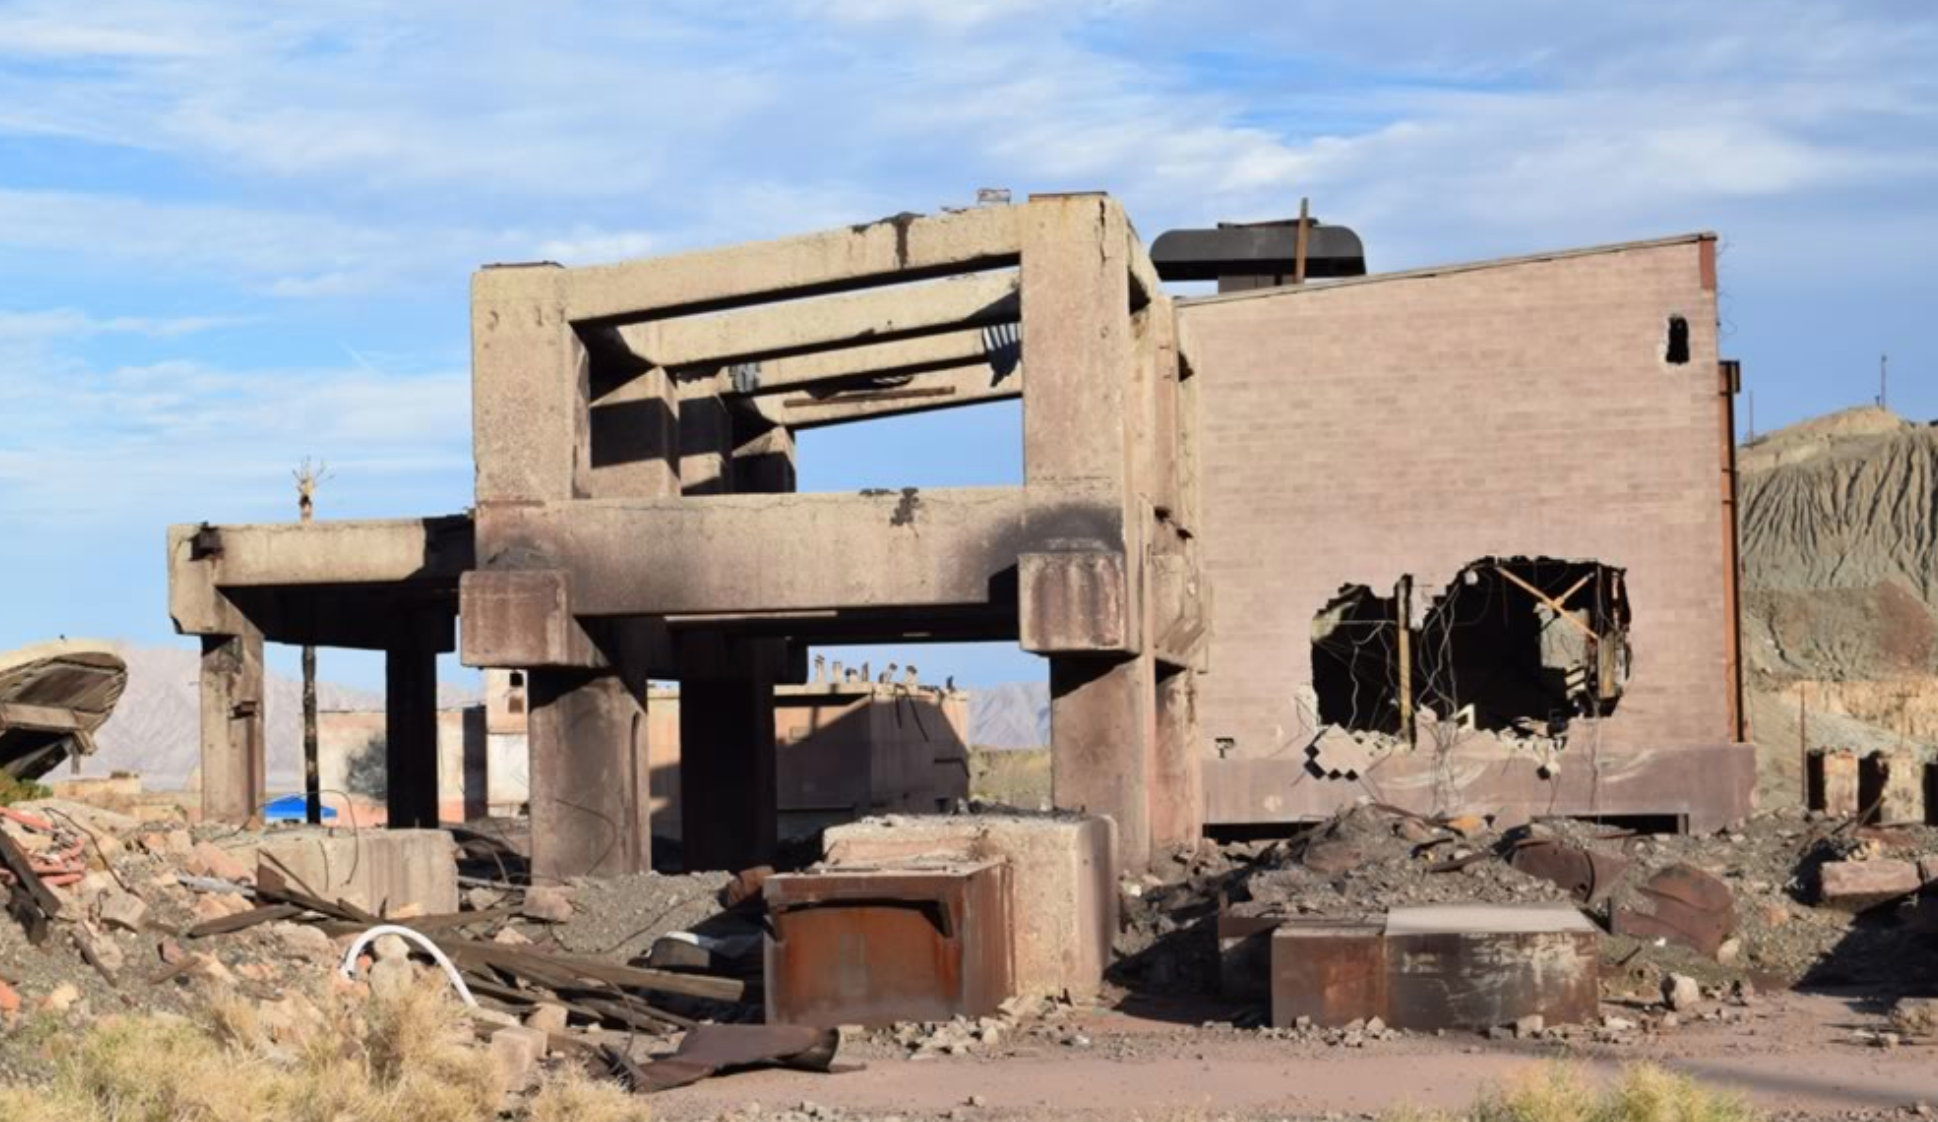 California Ghost Town Purchased for $22.5 Million By Mysterious Buyer